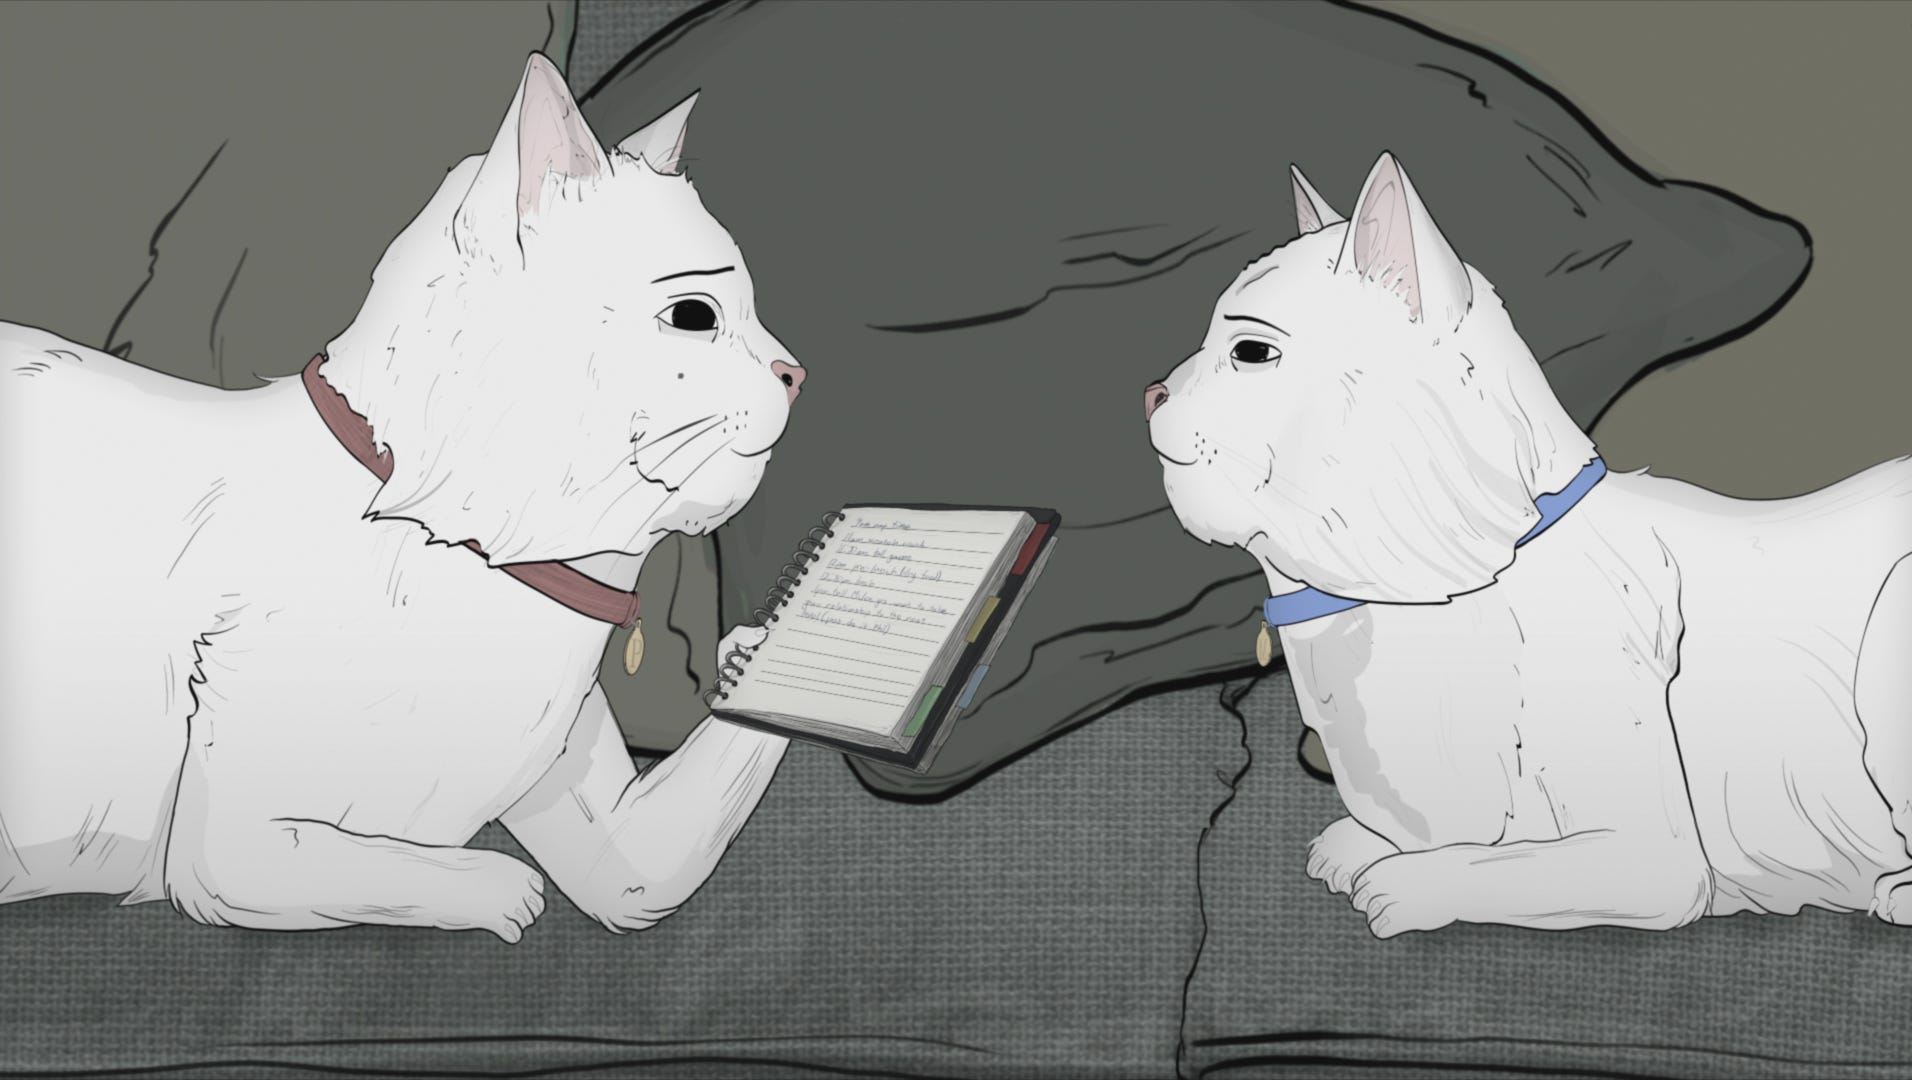 Meet the 'Animals' of HBO's new animated comedy